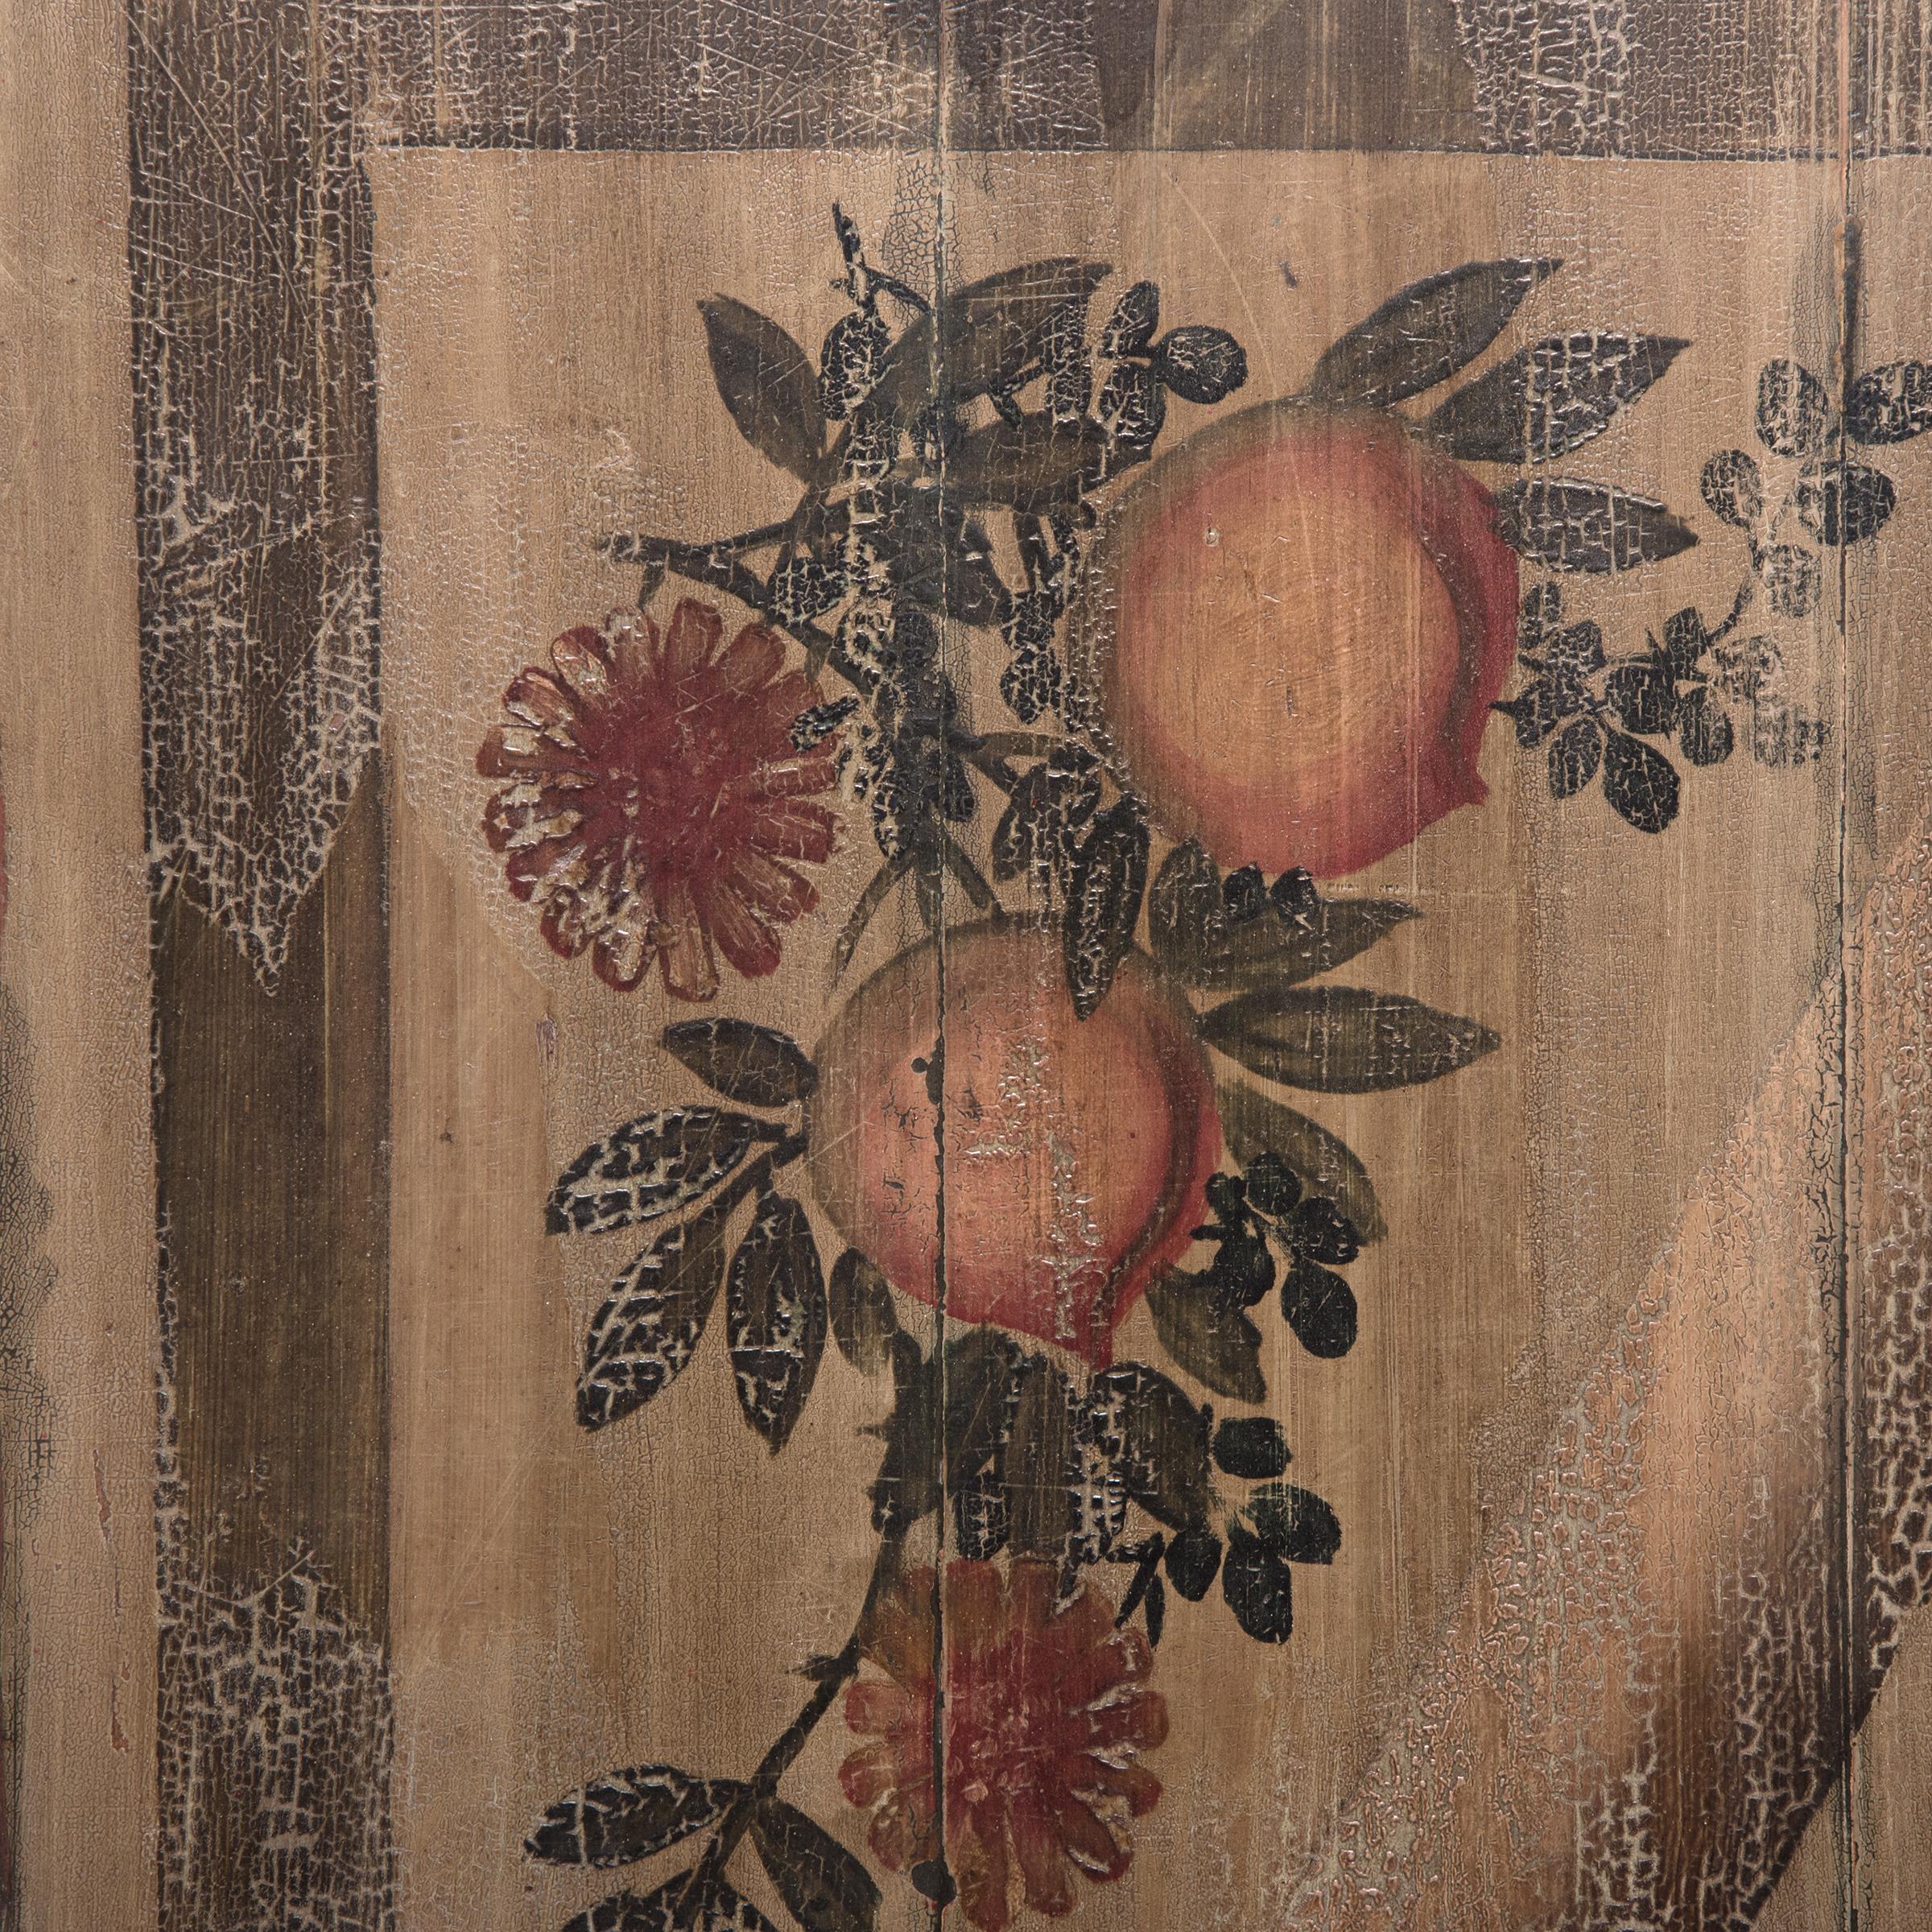 Thoughts of a long, happy life greeted the young couple who gazed up from their bed on this canopy panel. Adorned with chrysanthemums and peaches, both symbols of longevity, the lyrical motif was carefully painted on wood by an early 20th-century